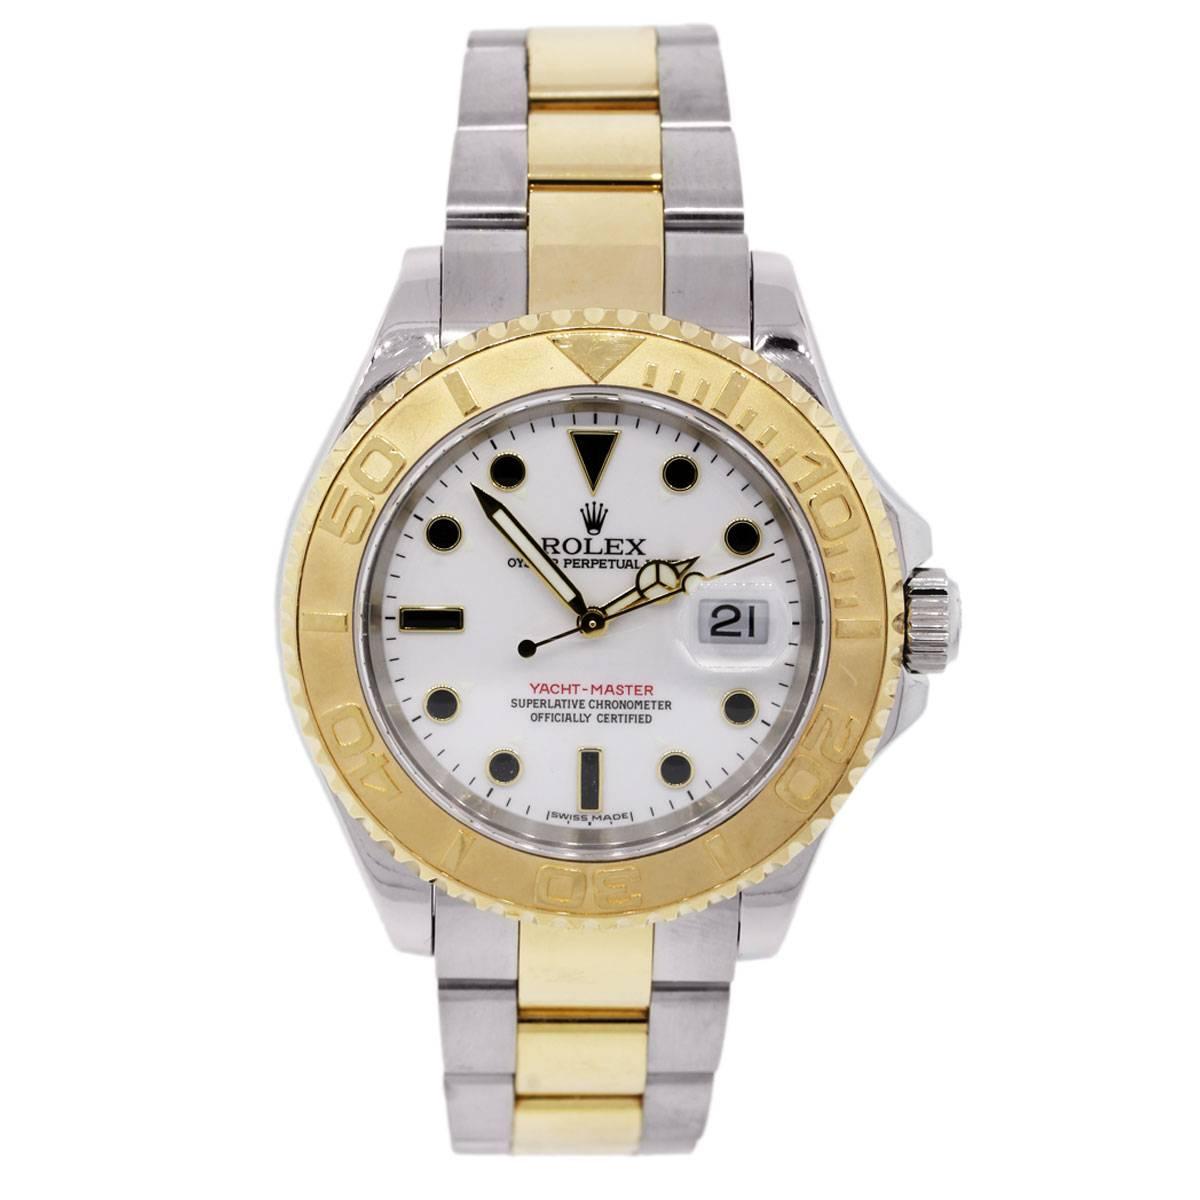 Brand: Rolex
MPN: 16623
Case Material: Stainless Steel
Case Diameter: 40mm
Bezel: 18k Yellow Gold Multi-directional Bezel
Dial: White dial with luminescent dial markers ; Date at 3 o'clock
Bracelet: Stainless Steel and 18k Yellow Gold Oyster